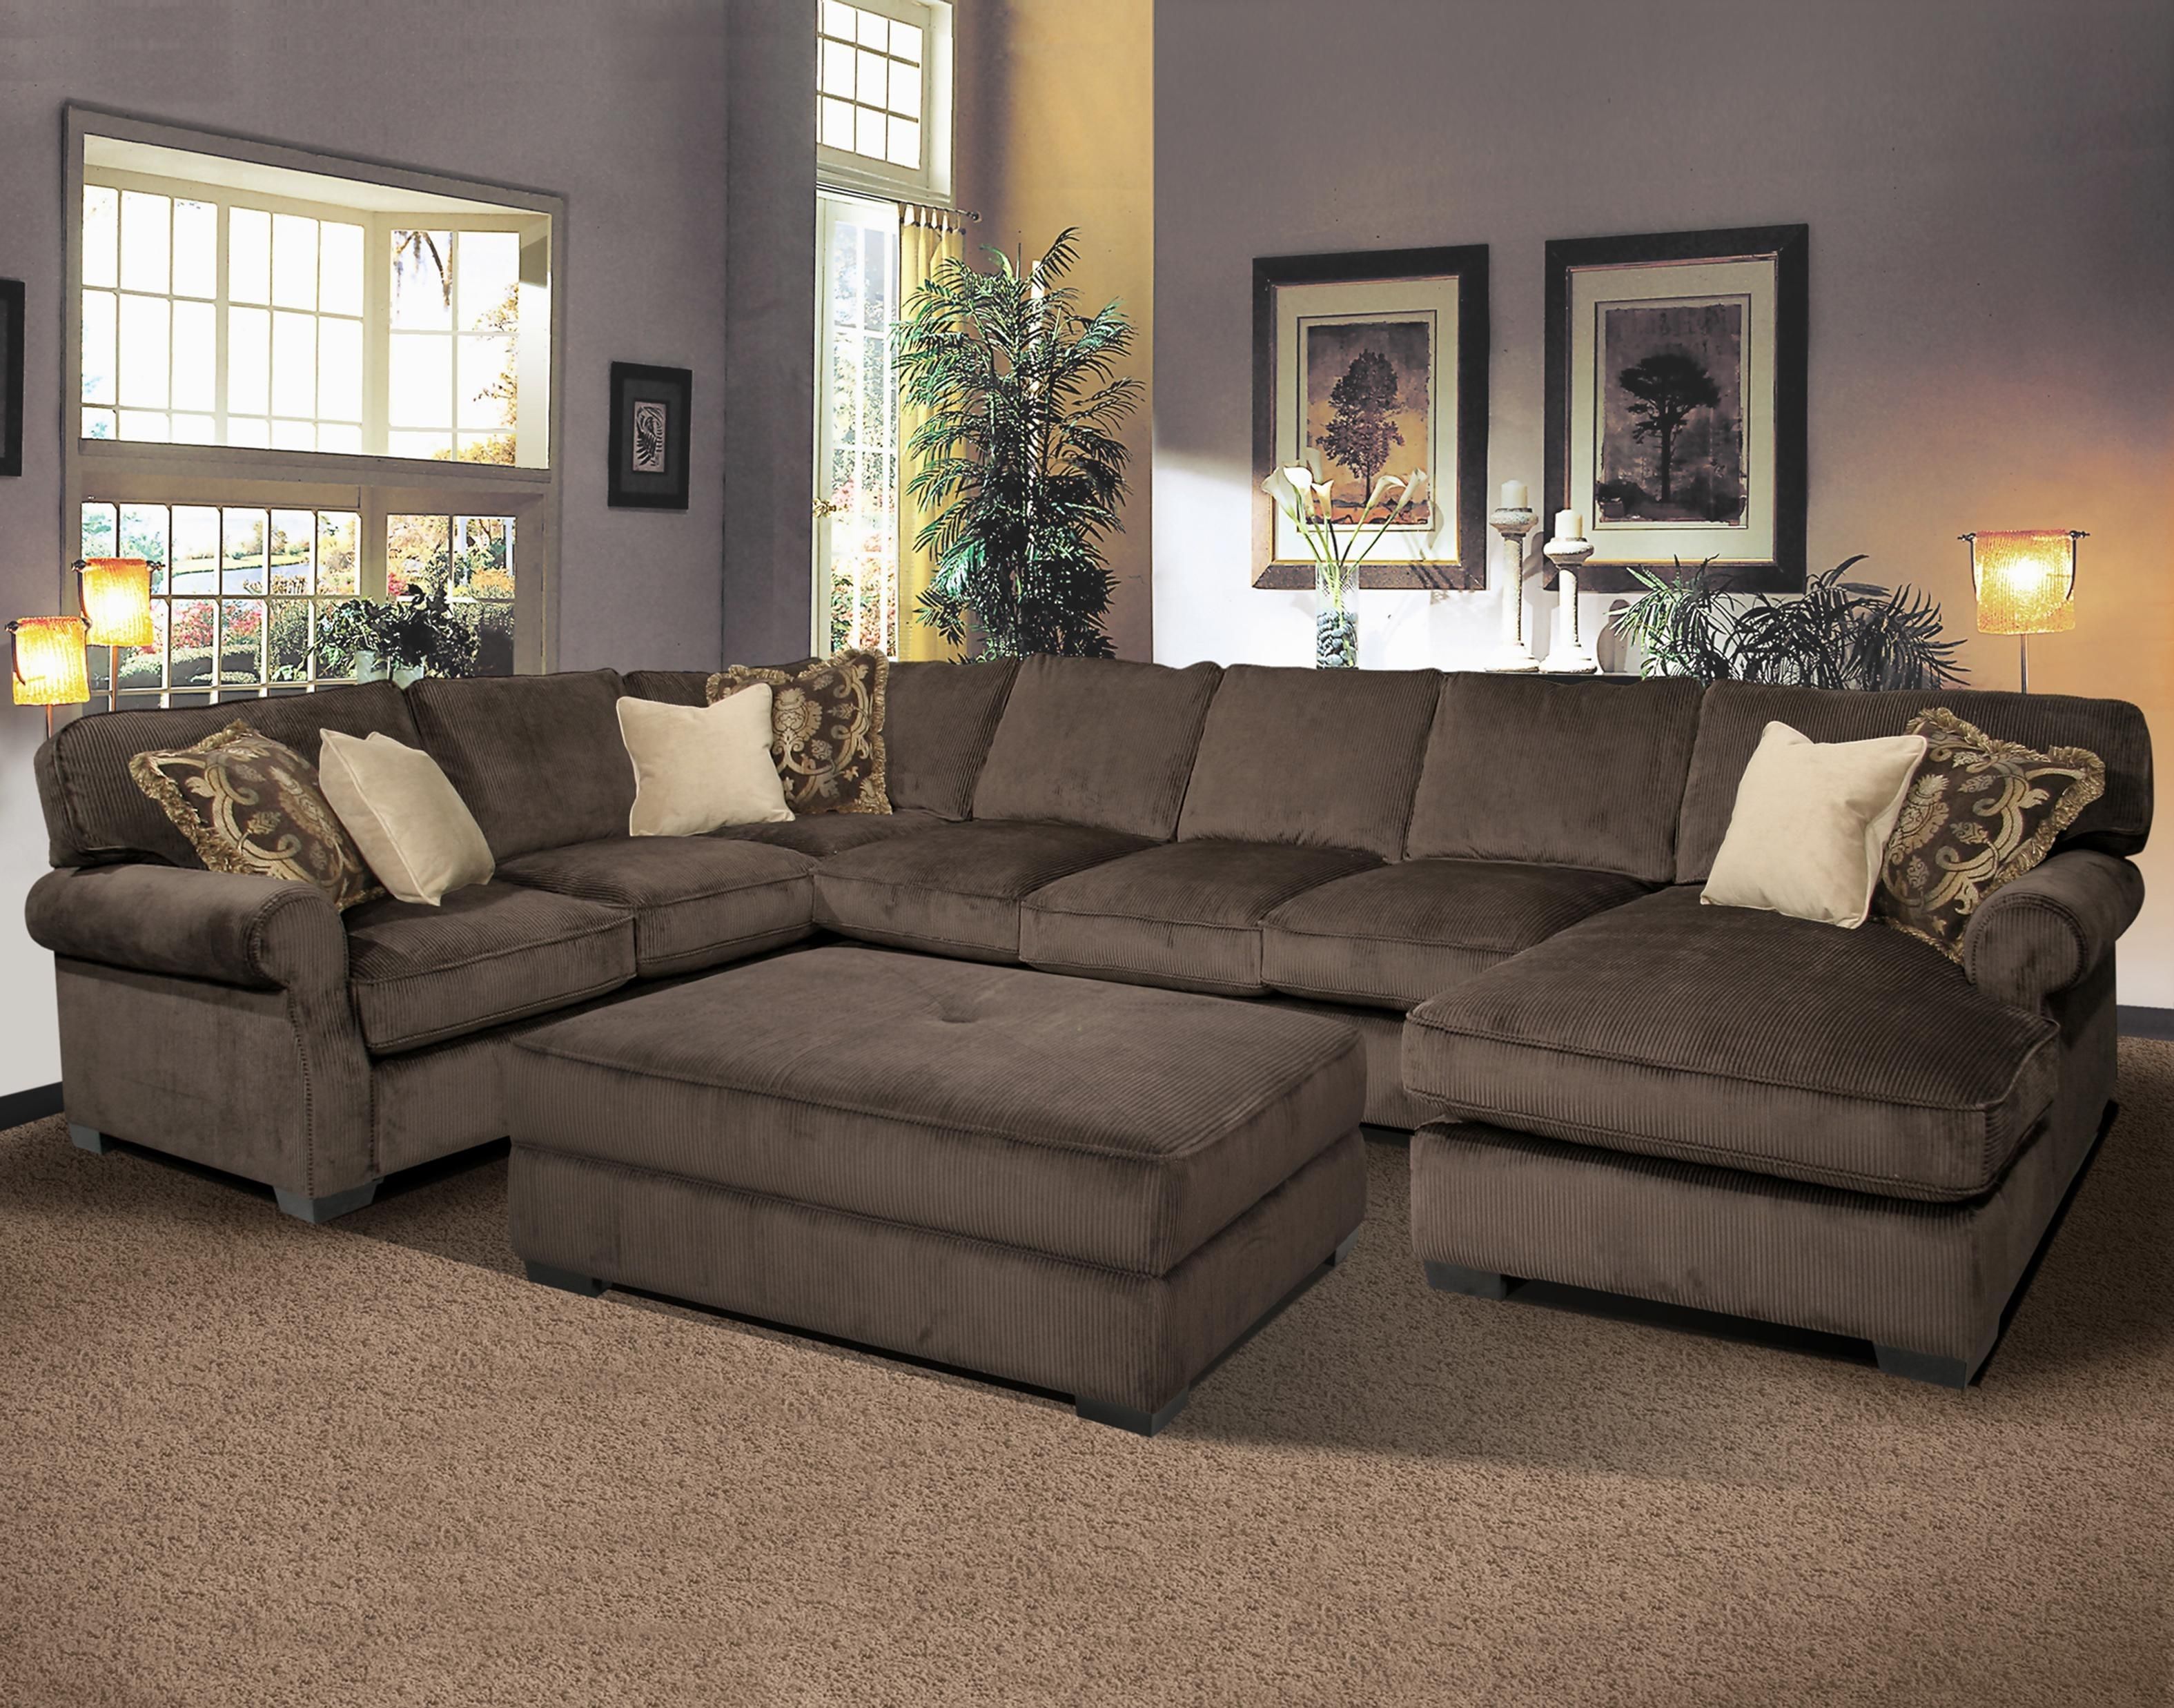 Big And Comfy Grand Island Large, 7 Seat Sectional Sofa With Right For Home Furniture Sectional Sofas (View 4 of 10)